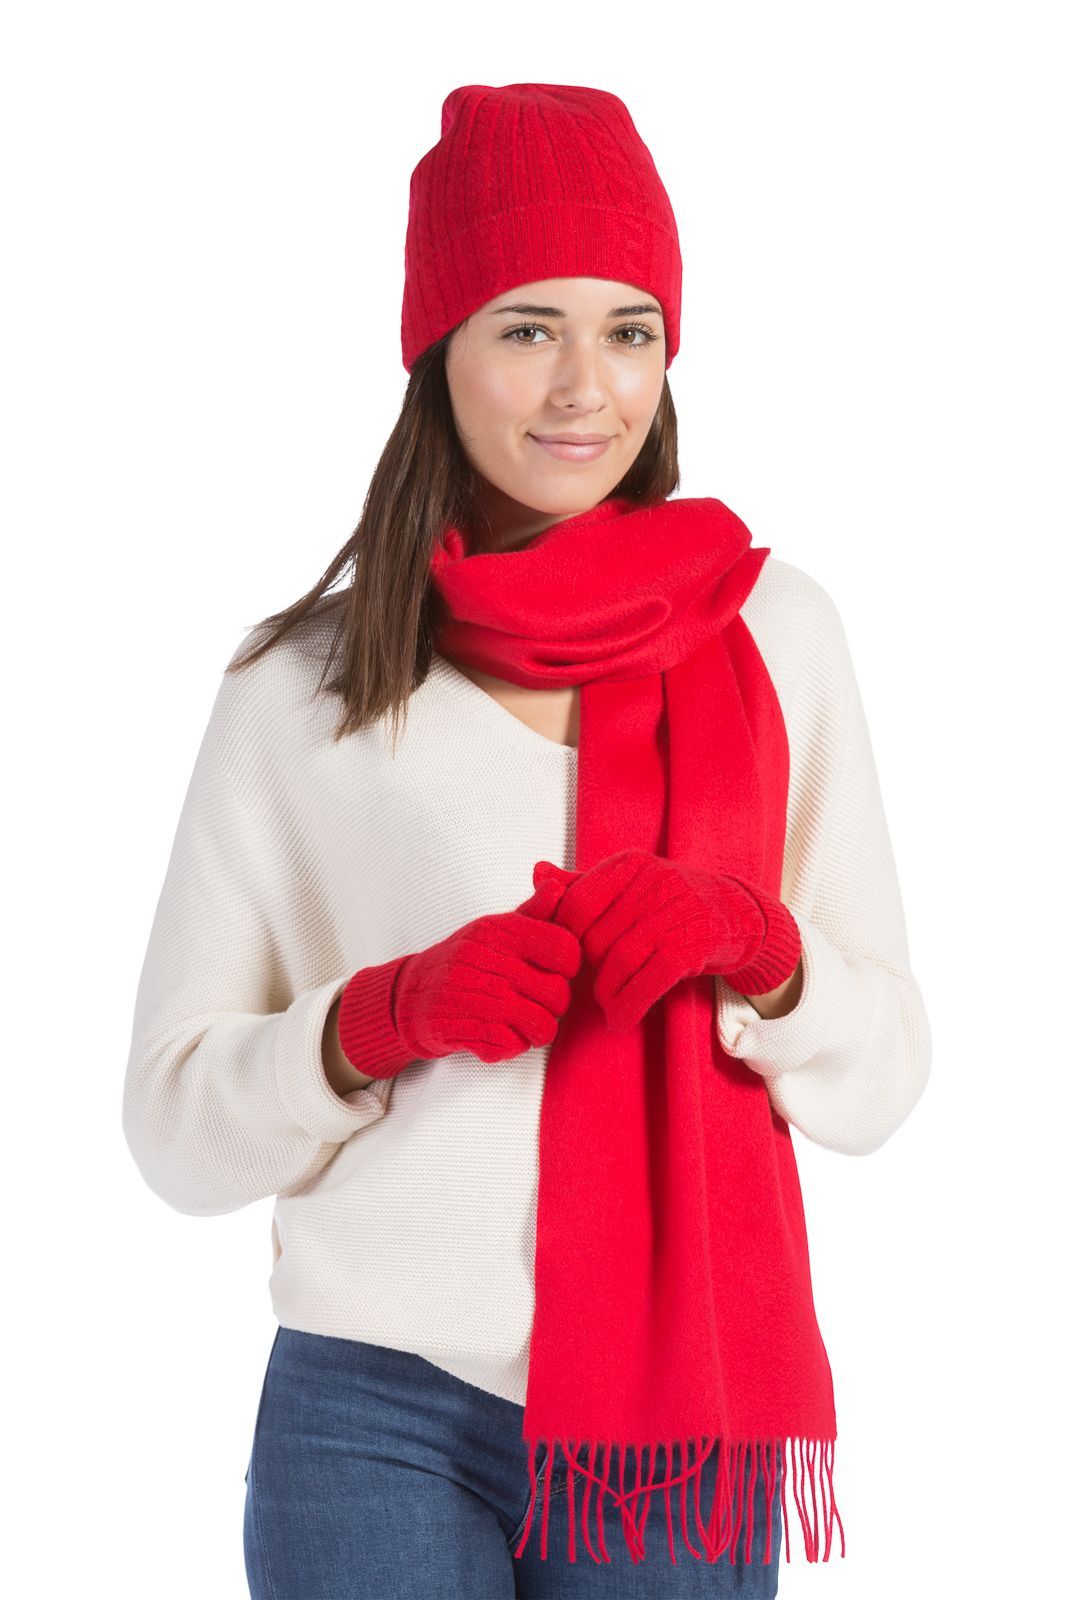 Fishers Finery Women's 100% Cashmere Pom Hat and Glove Set; with